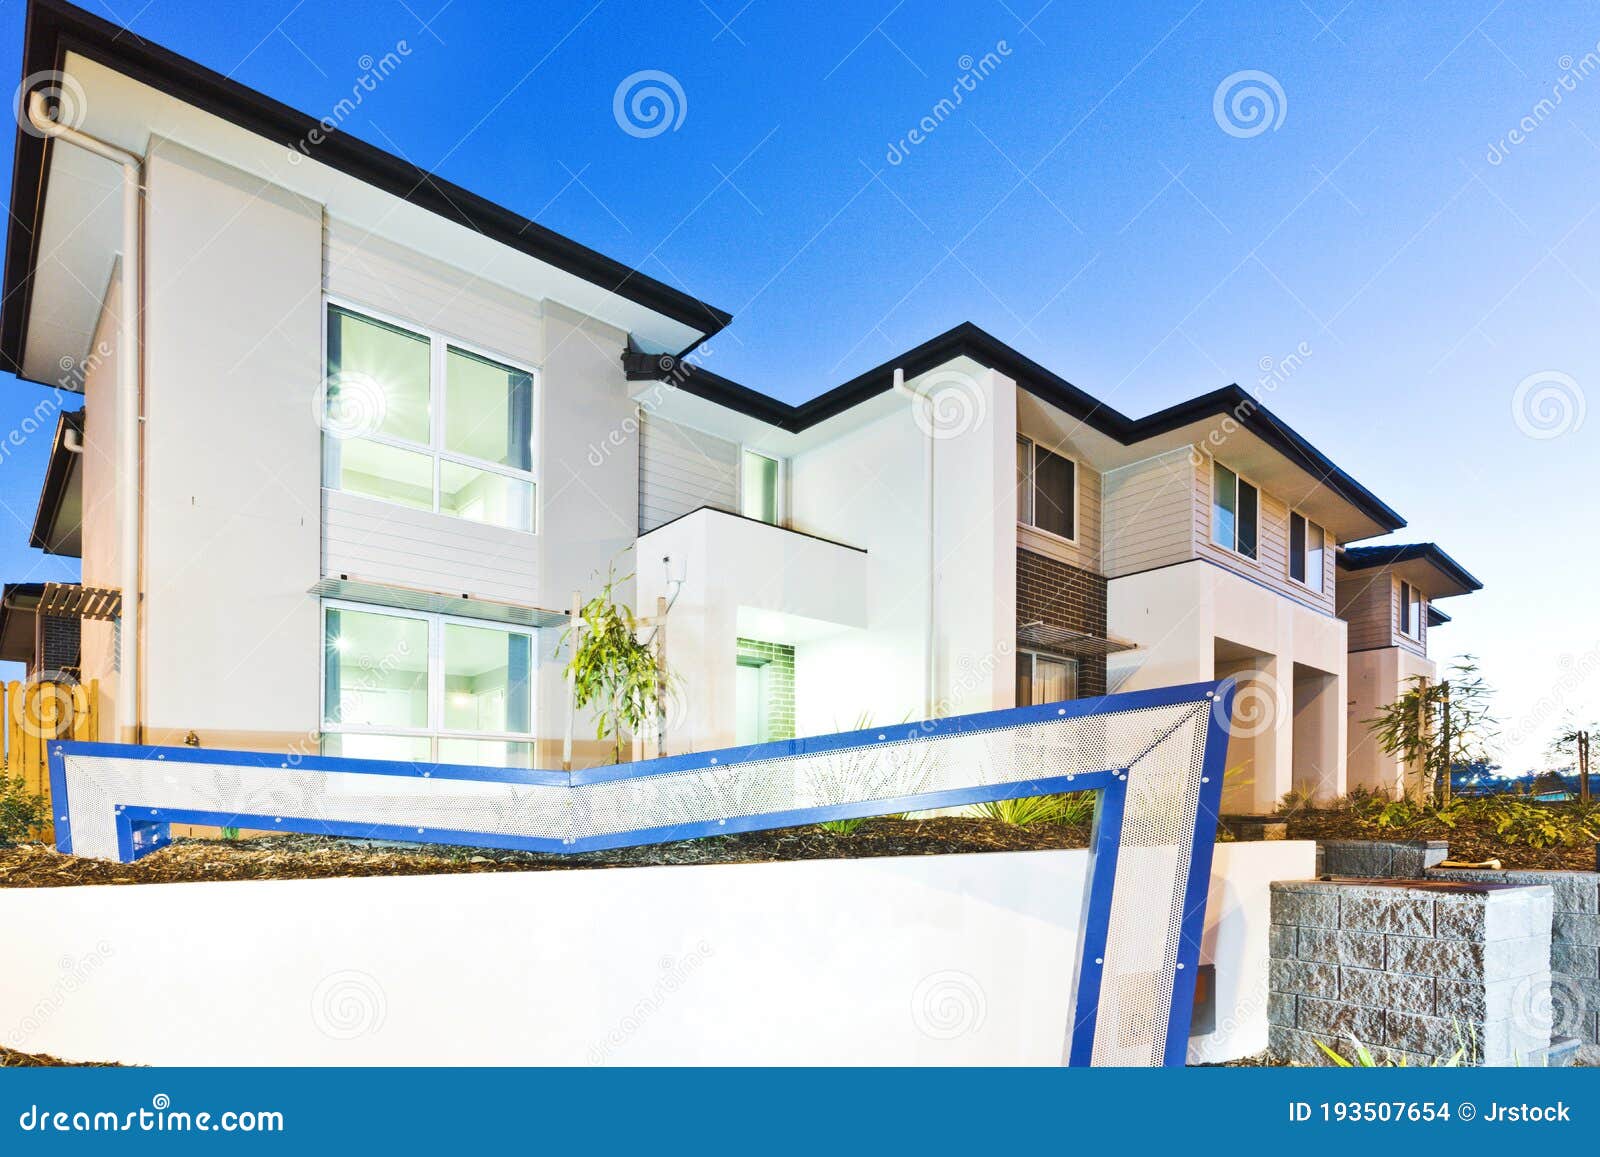 Modern House Exterior At Twilight. Luxury Villa With Garage. Stock Photo,  Picture and Royalty Free Image. Image 203466824.